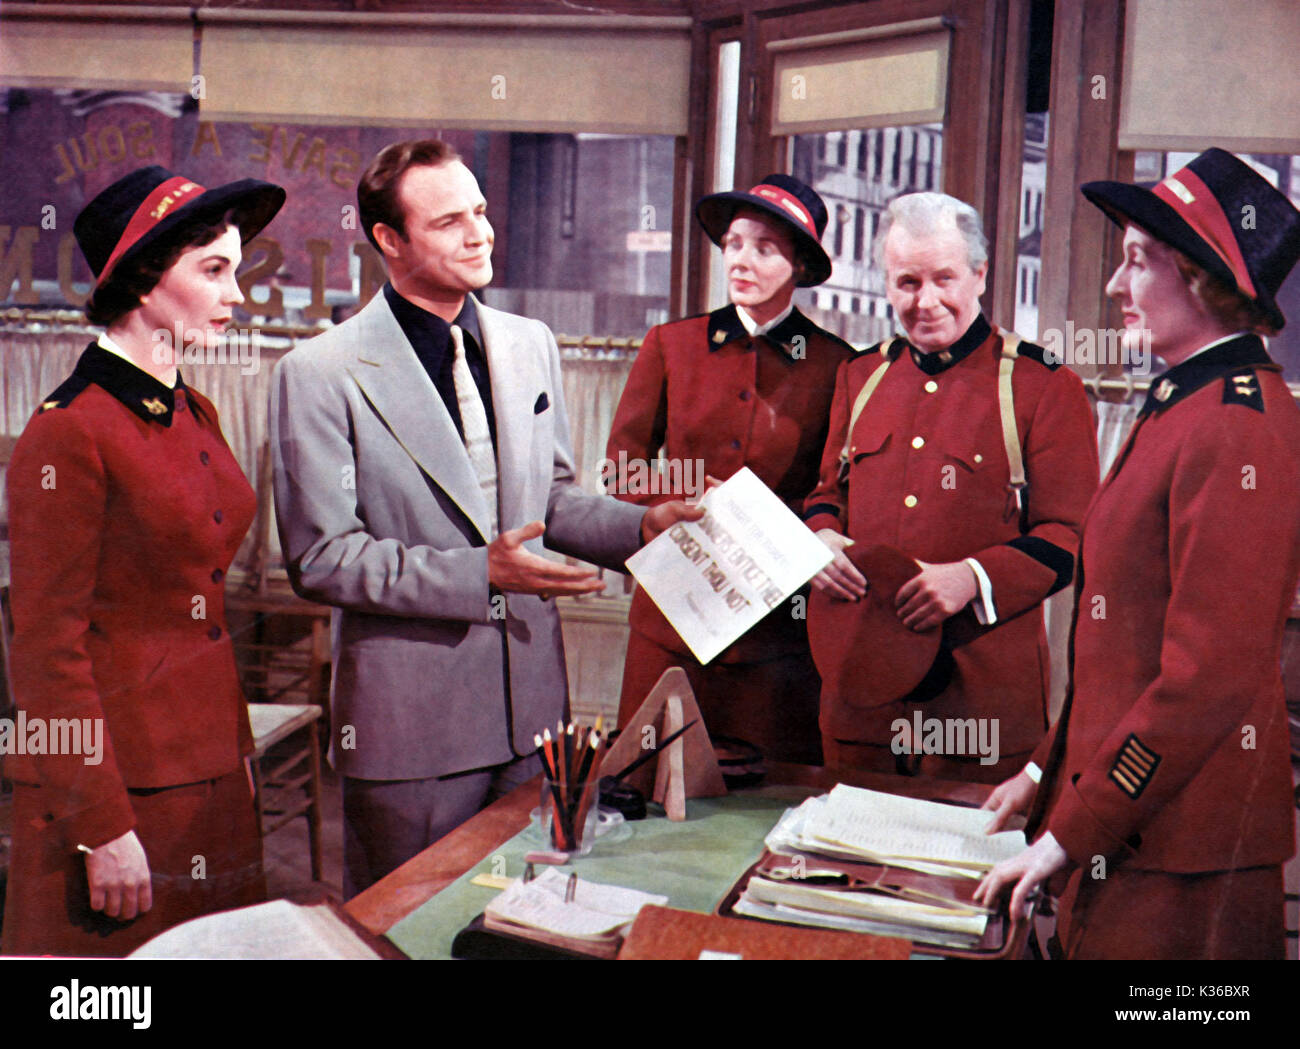 GUYS AND DOLLS JEAN SIMMONS. MARLON BRANDO, UNIDENTIFIED X 2 AND KATHRYN GIVNEY A 20TH CENTURY FOX FILM     Date: 1956 Stock Photo